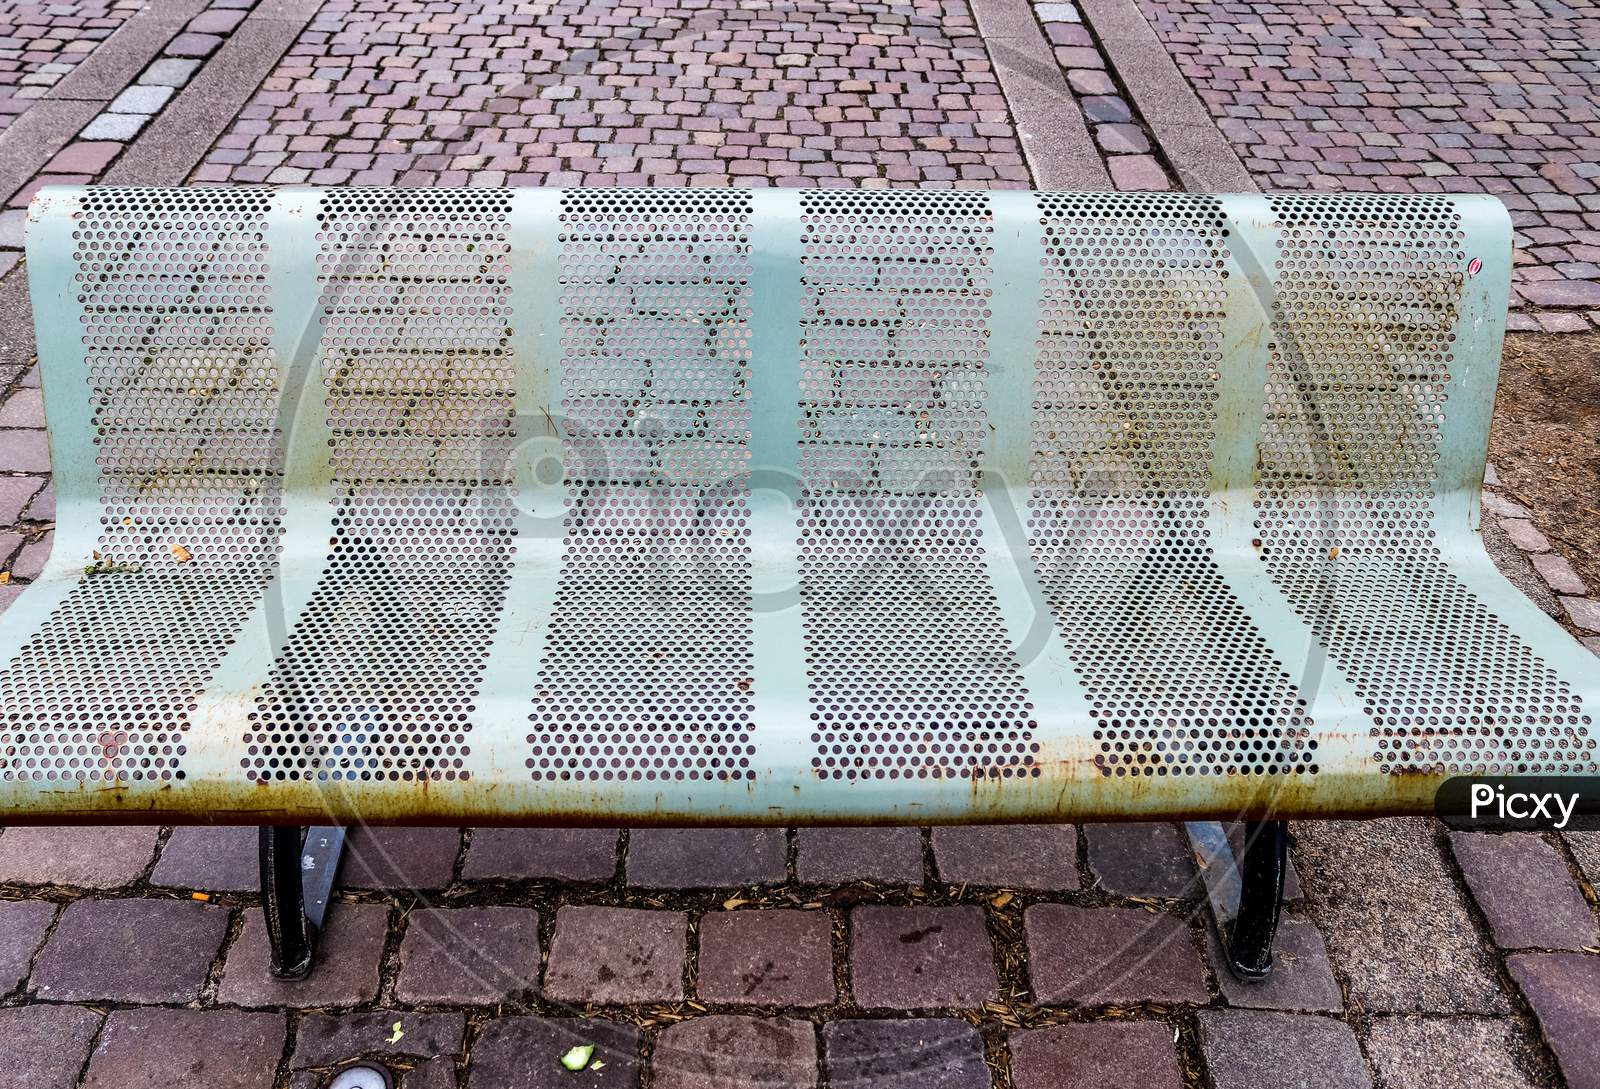 A public empty bench found in northern Europe